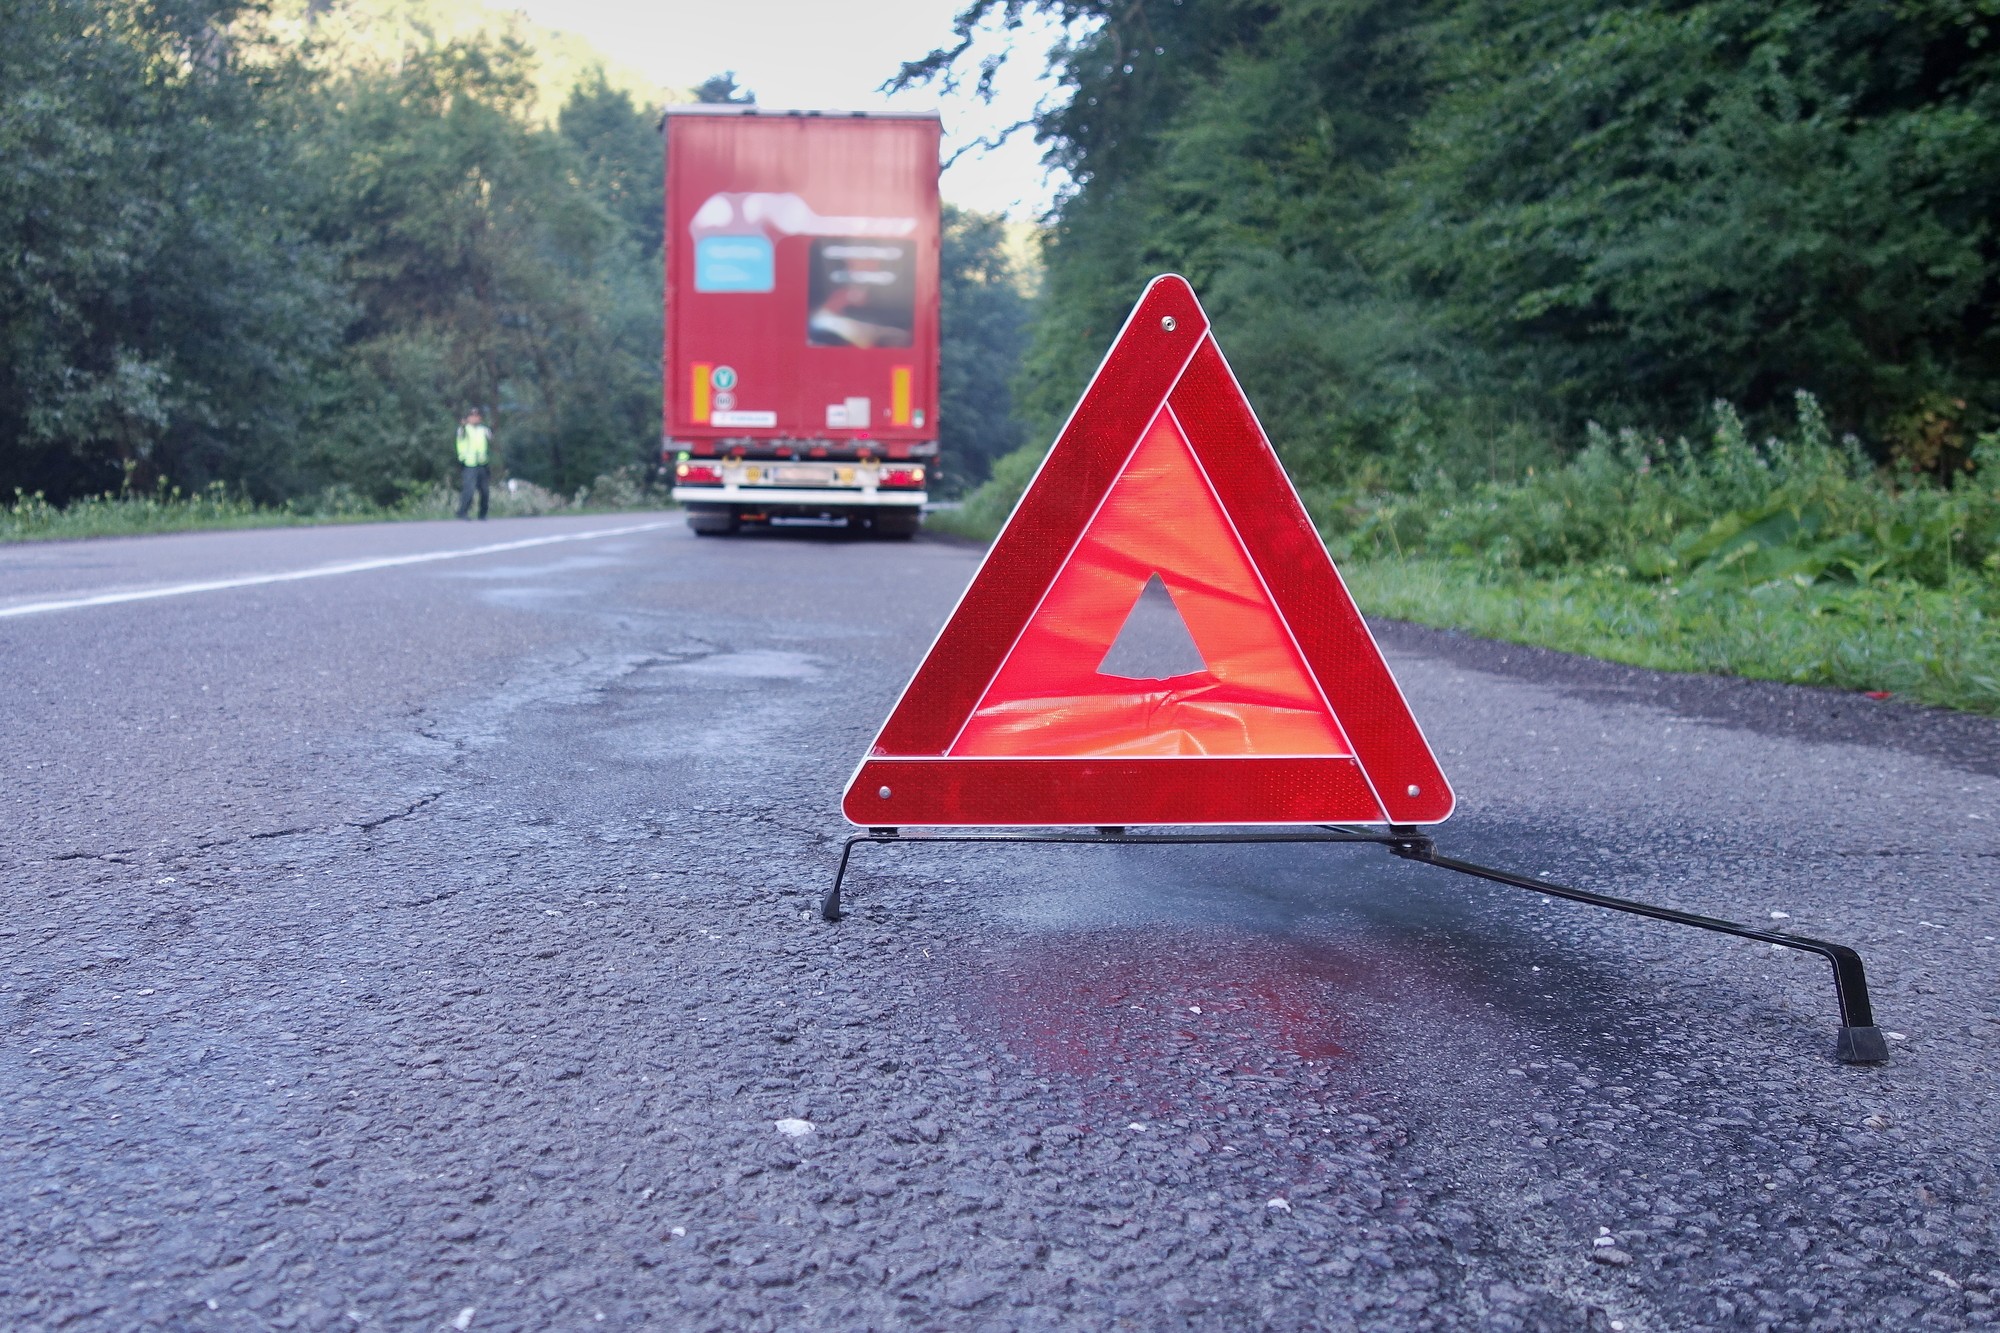 Red Warning Triangle on a Road